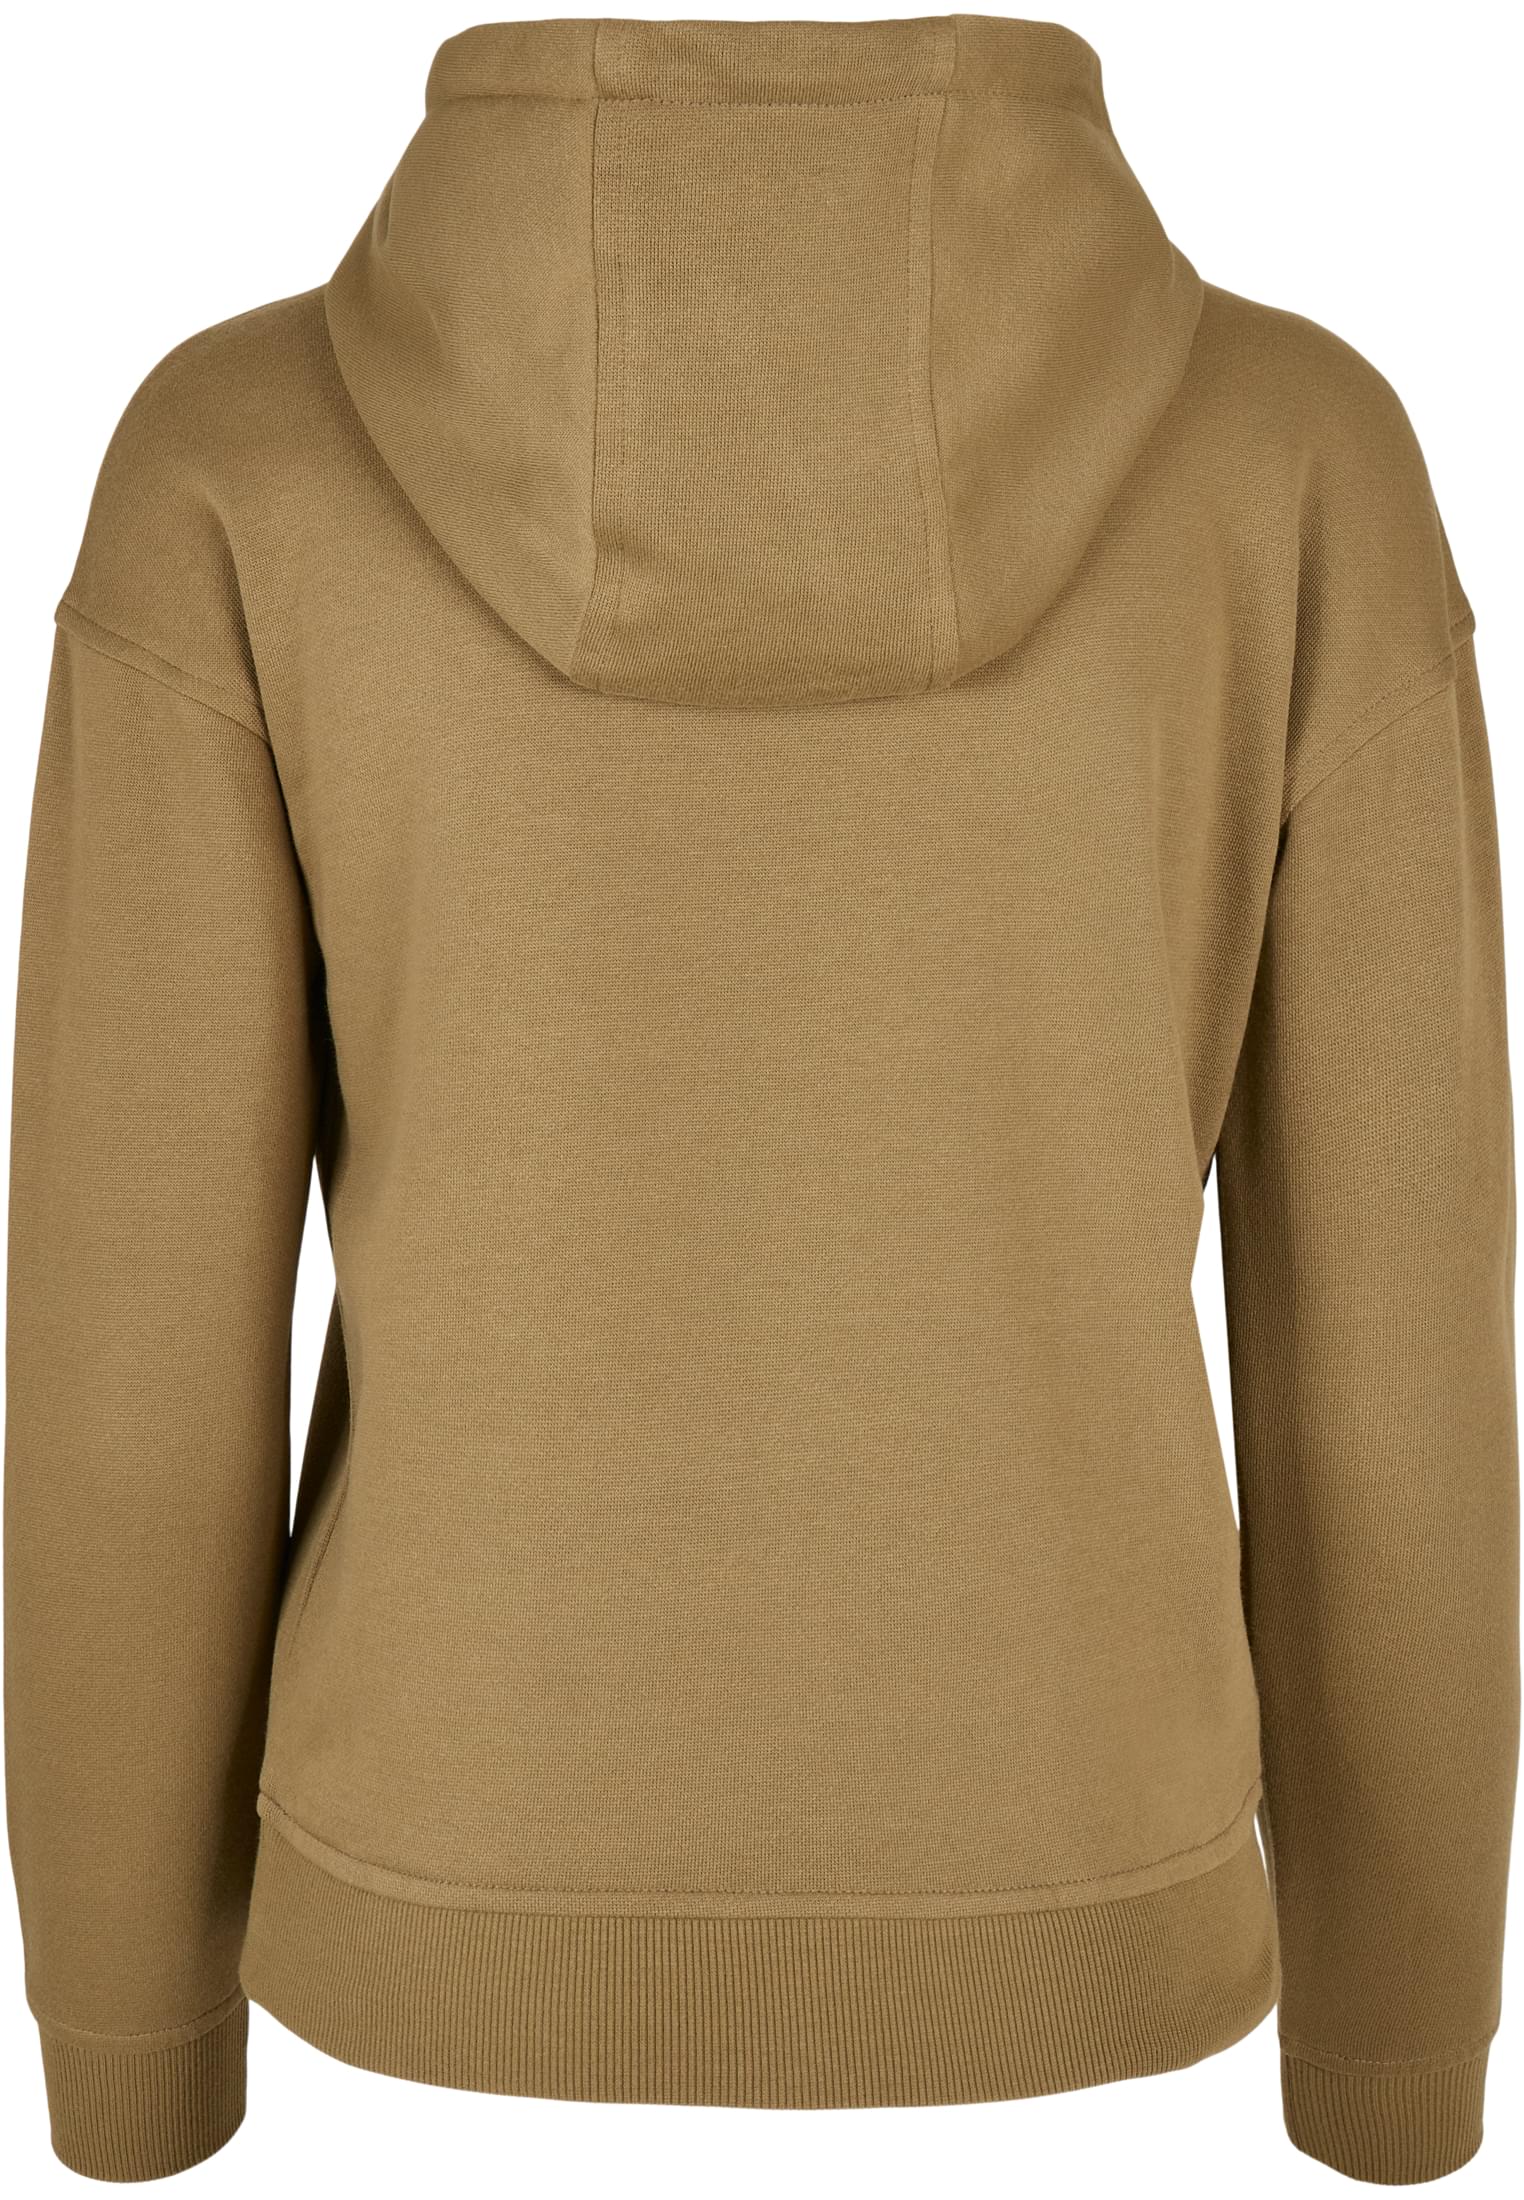 Damen Ladies Hoody in Farbe tiniolive